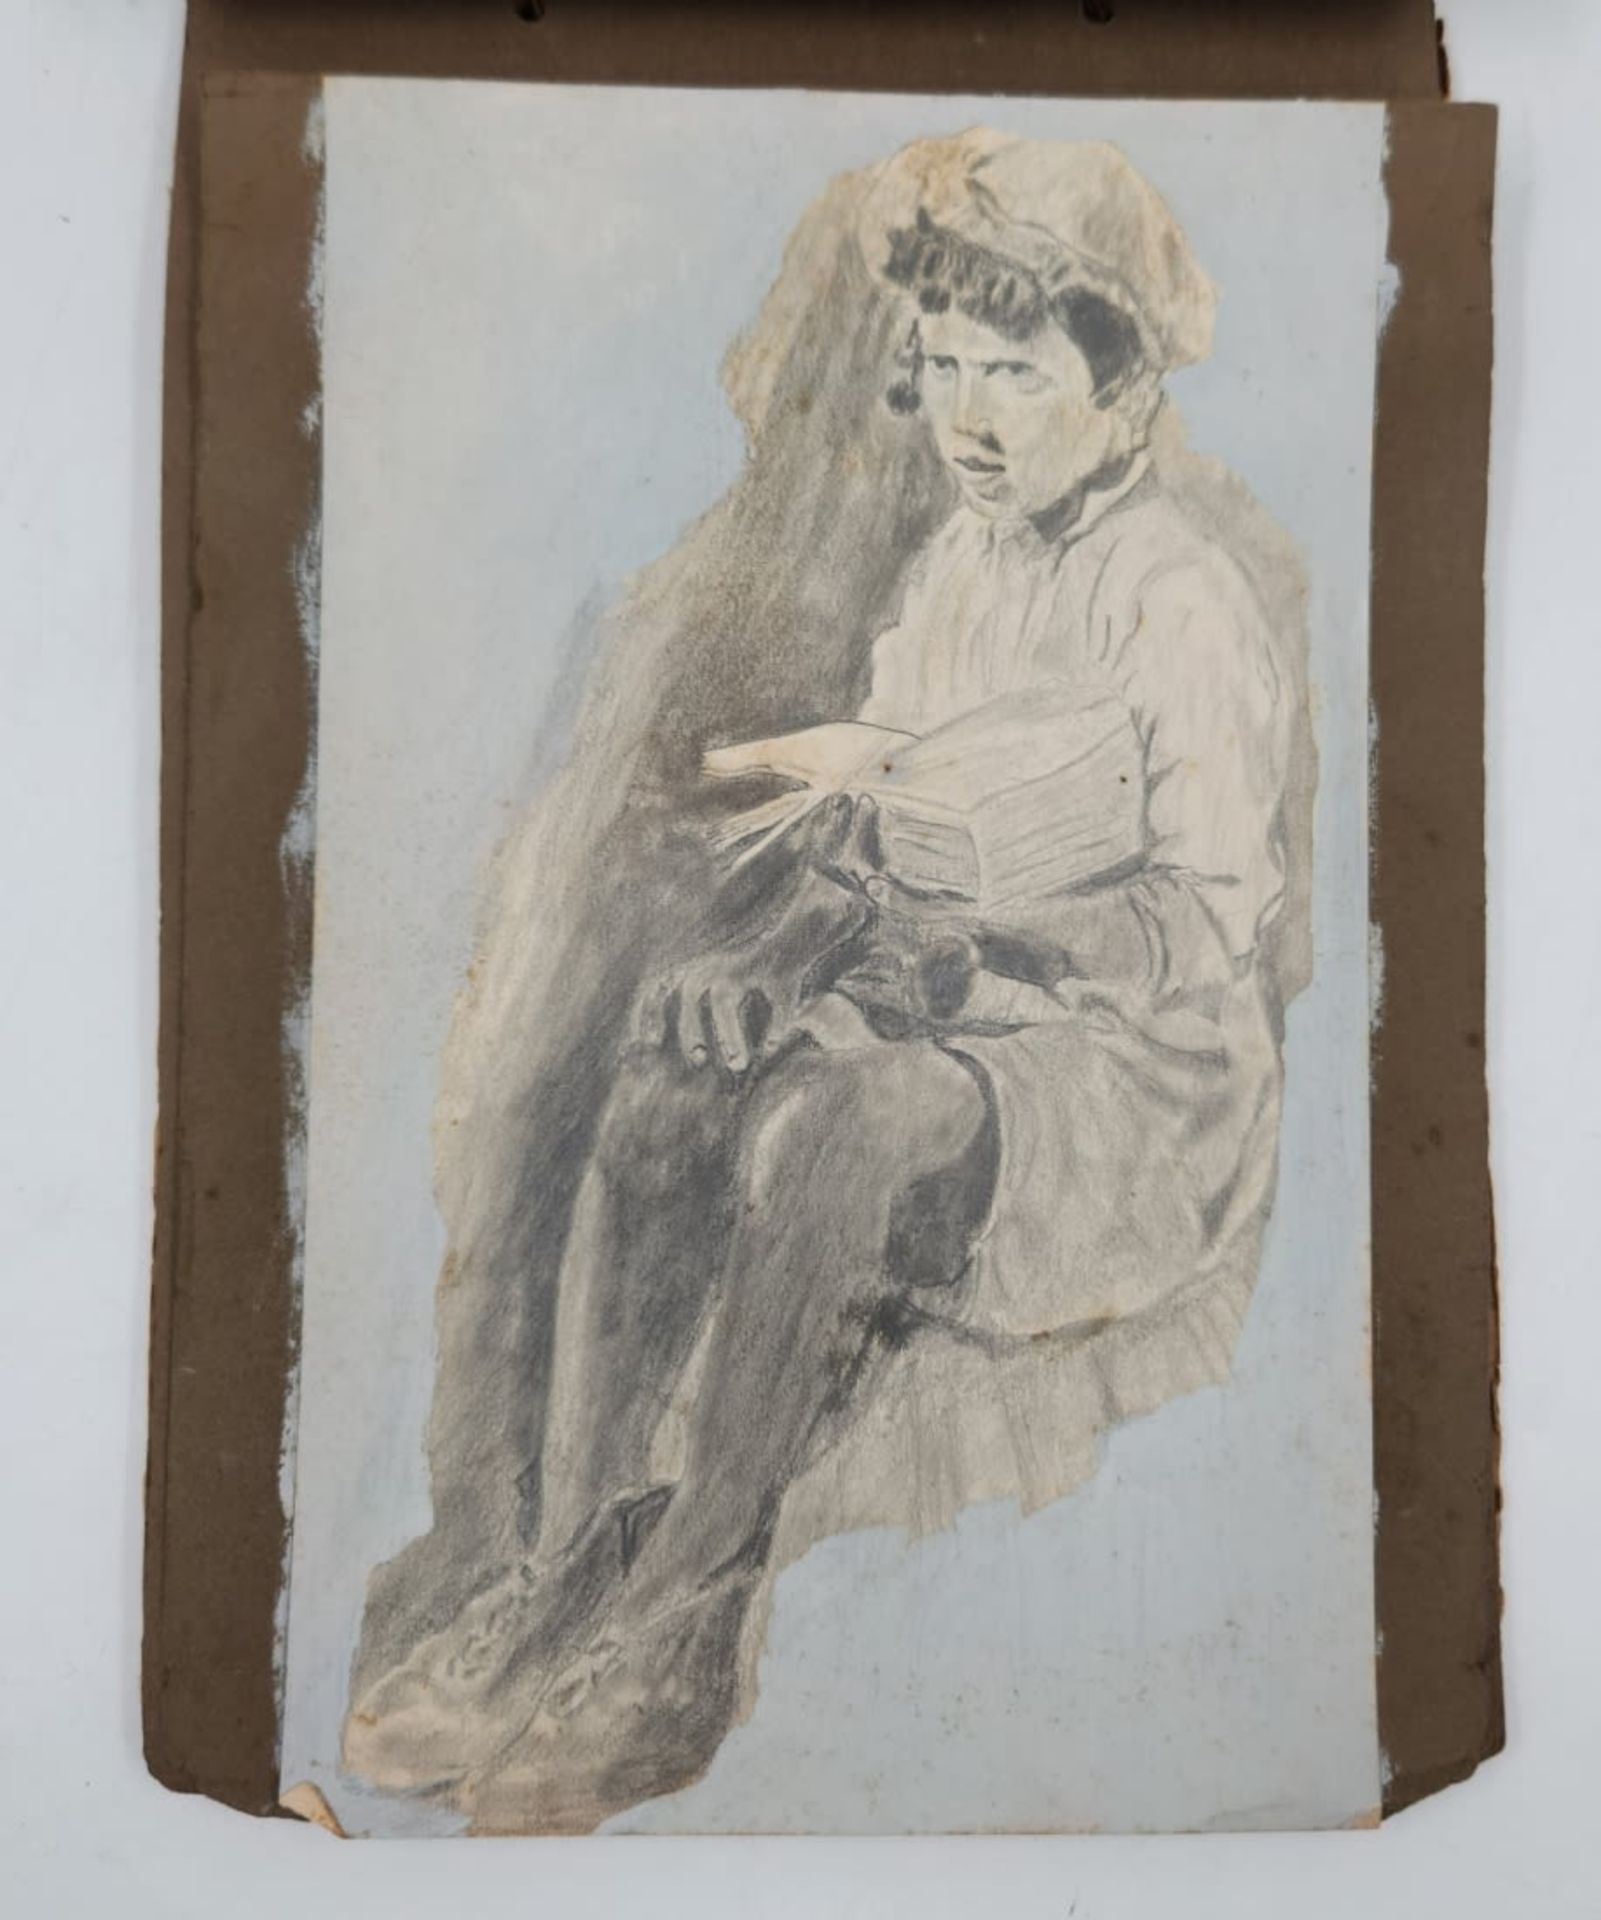 11 drawings of Jewish man, J. Shoham, pencil on paper, some stains, signed: J. Shoham pasted in an - Image 11 of 12